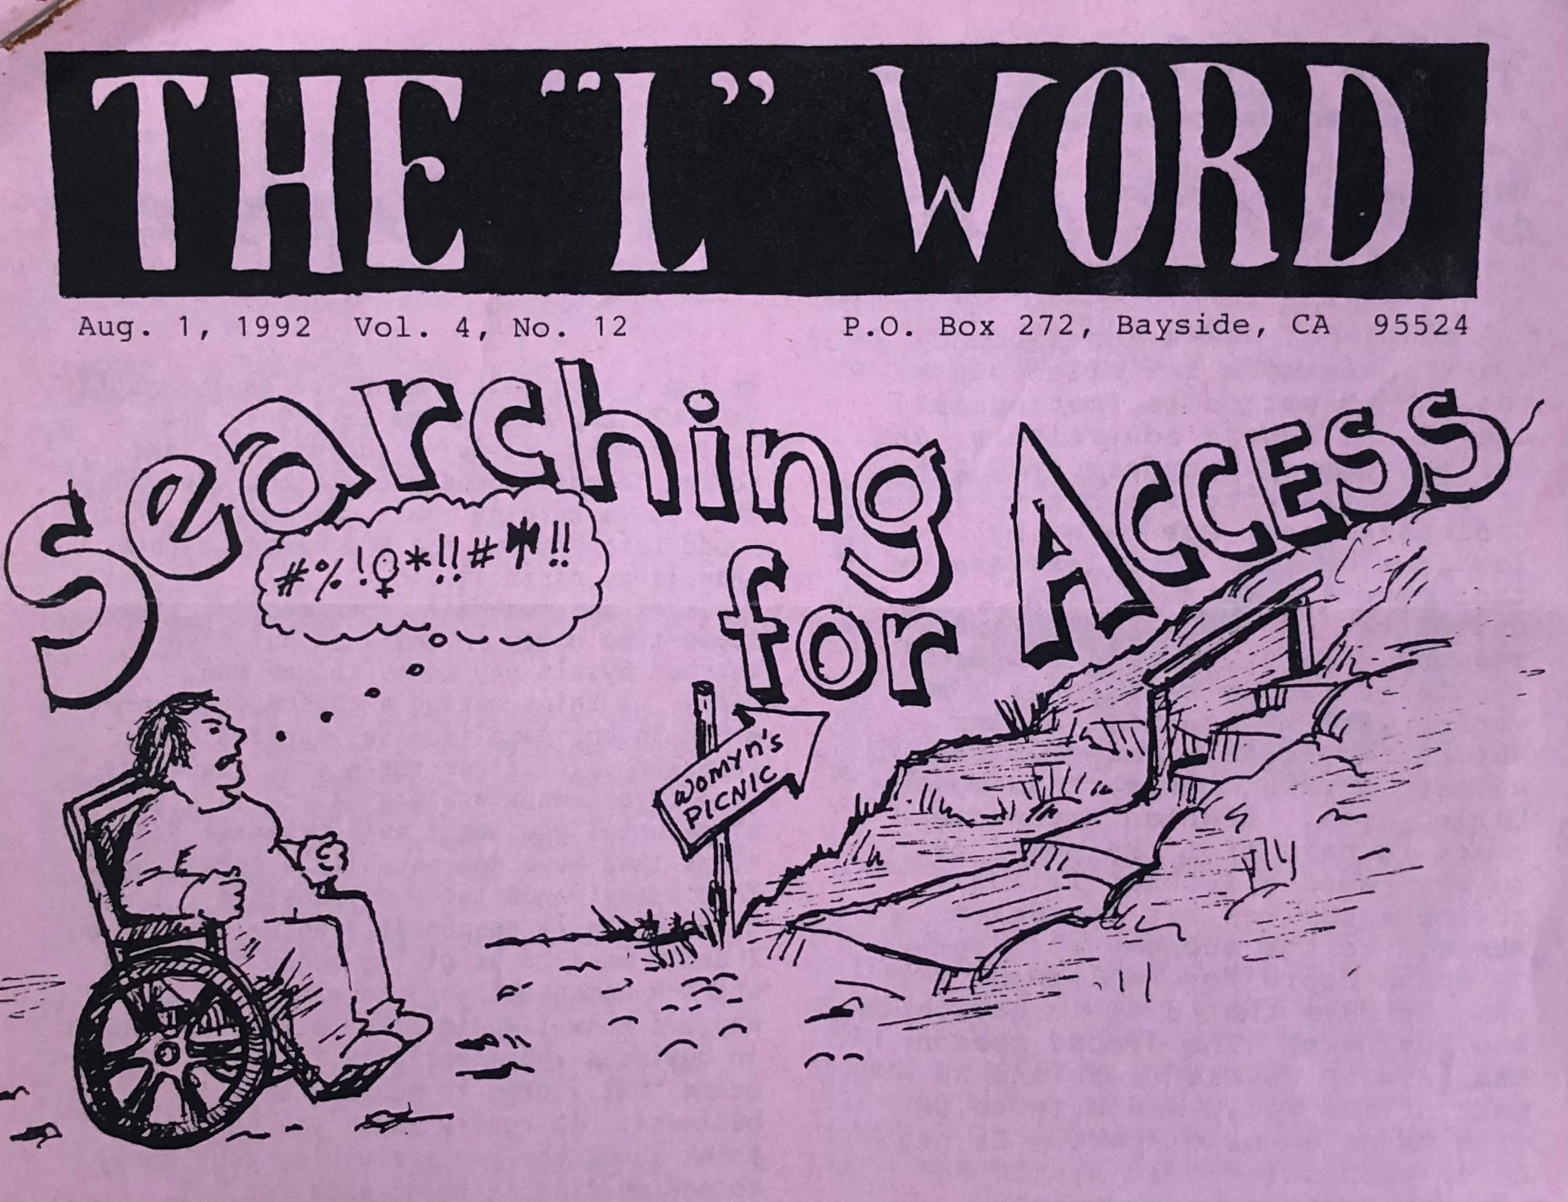 Purple page with "The 'L' Word" written across the top, followed by "August 1 1992, Volume 4, Number 12. P.O. Box 272, Bayside, California, 95524." The page has an illustration/sketch of a woman in a wheelchair at the bottom of a hill, with stairs and a sign pointing to the "Womyn's Picnic." The sketch is labeled "Searching for Access."